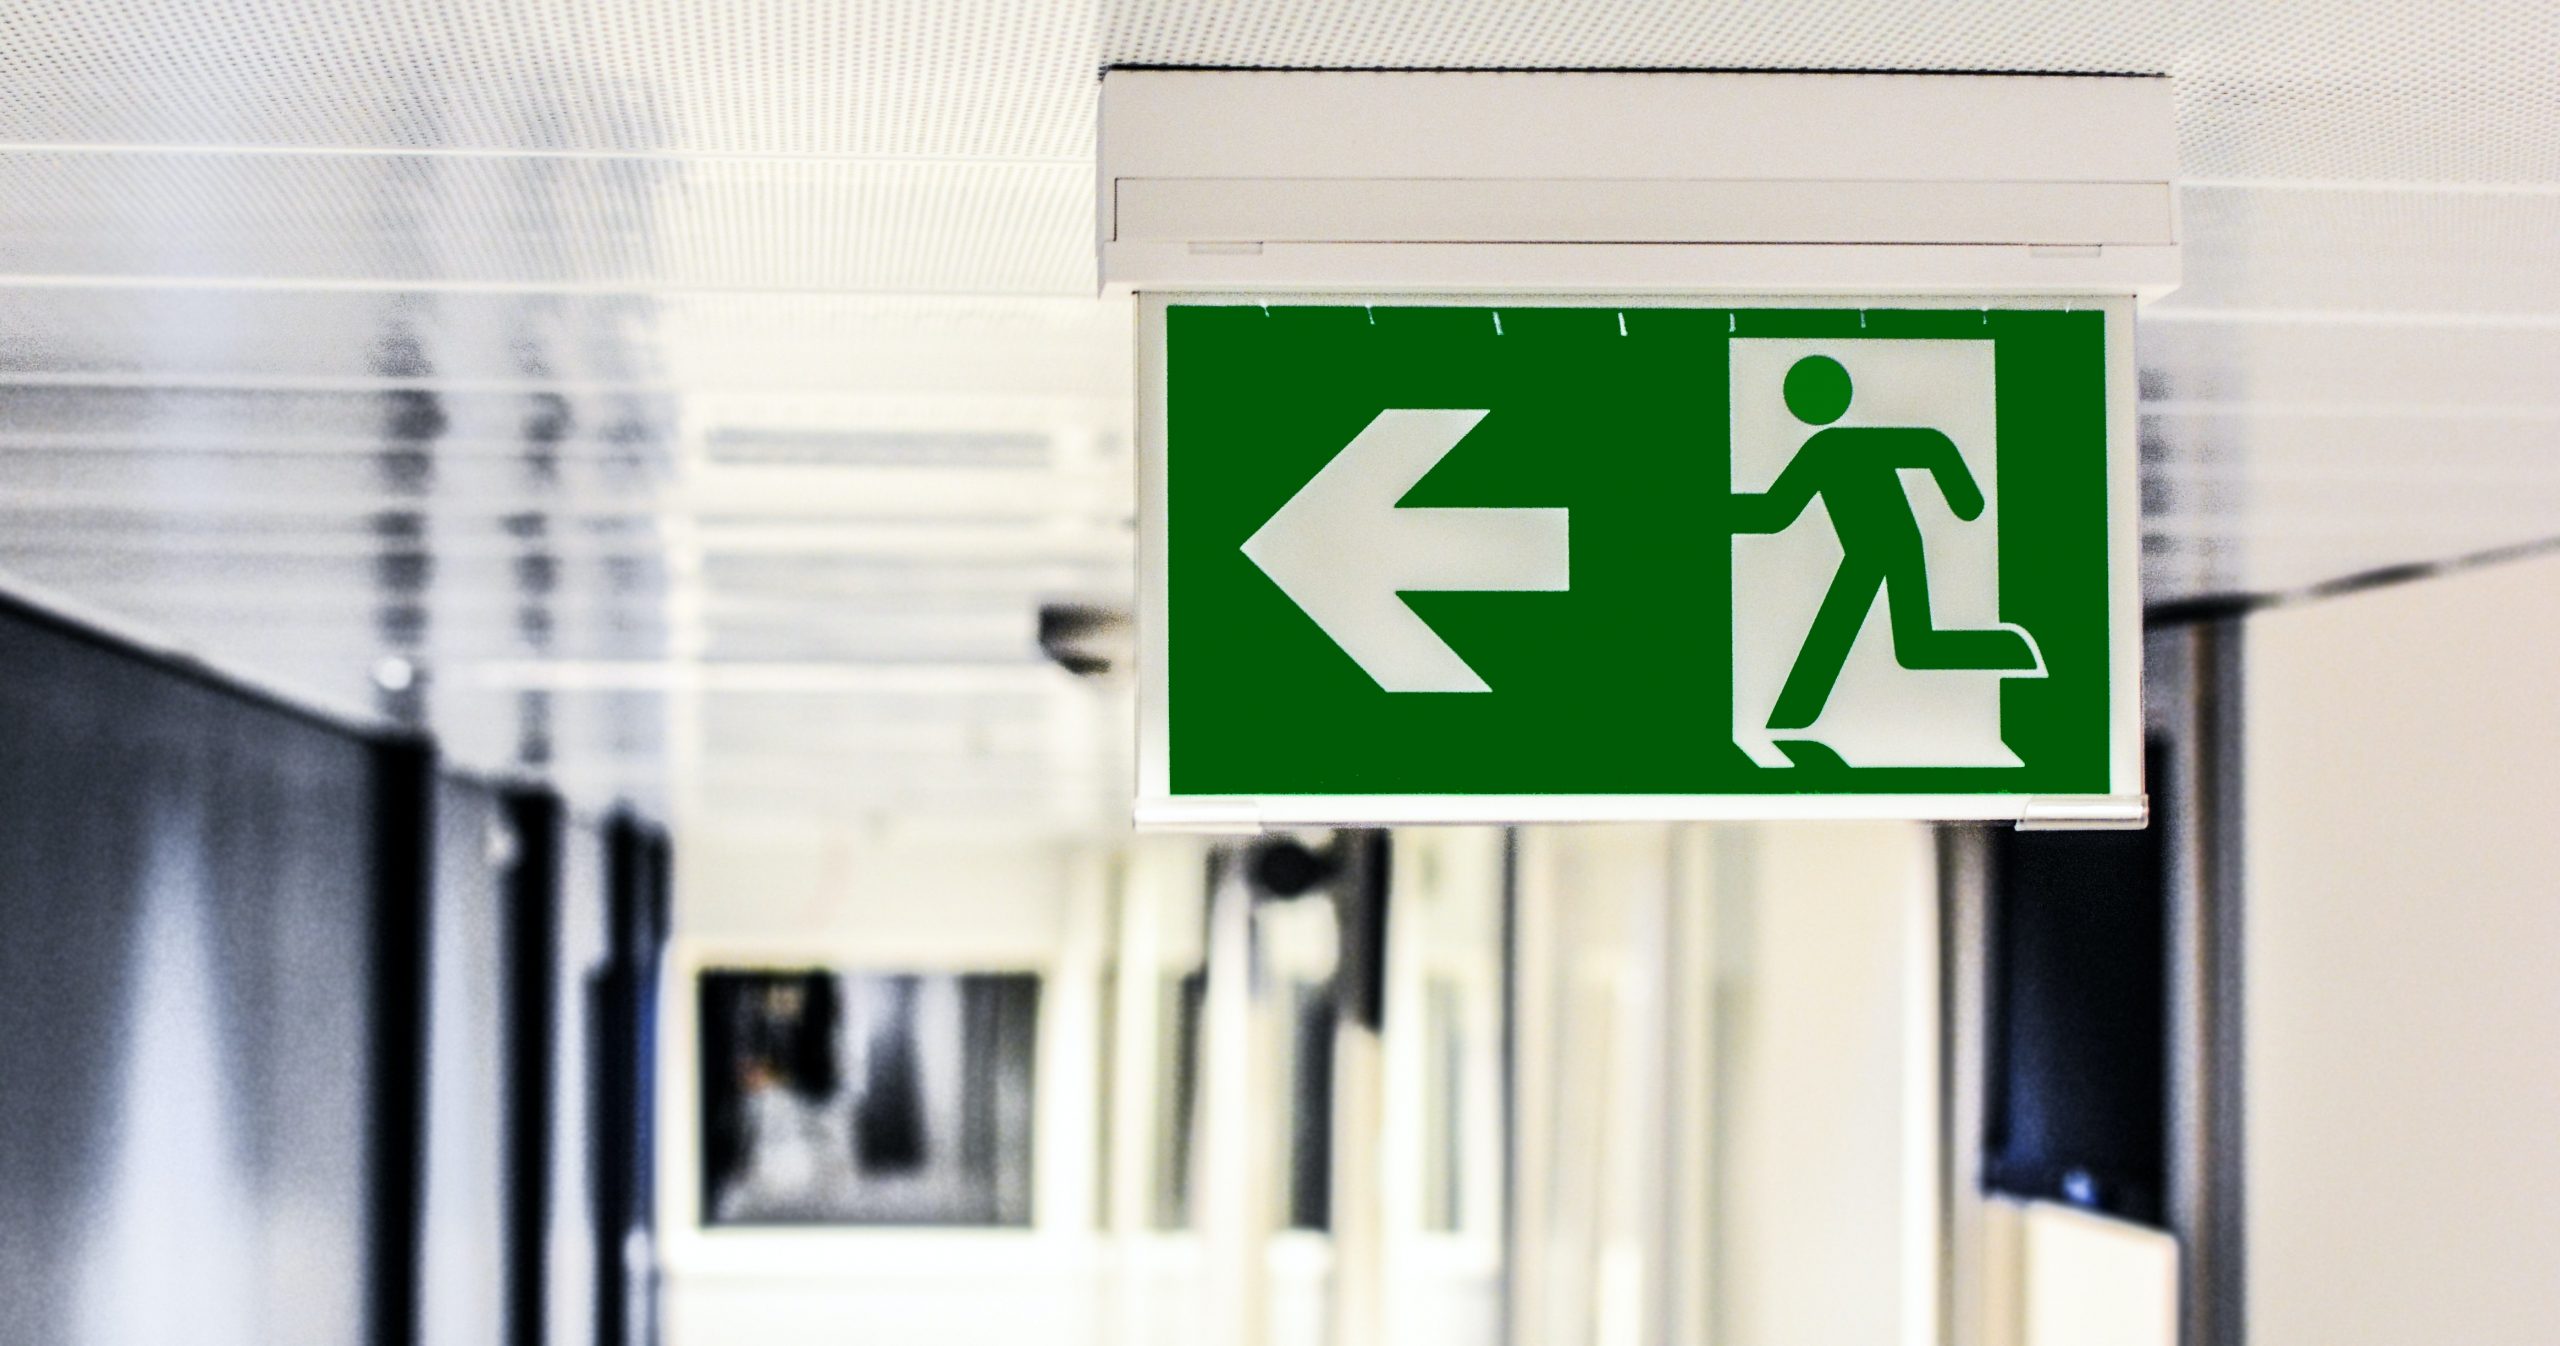 Does Your Company have a Fire Evacuation Plan?